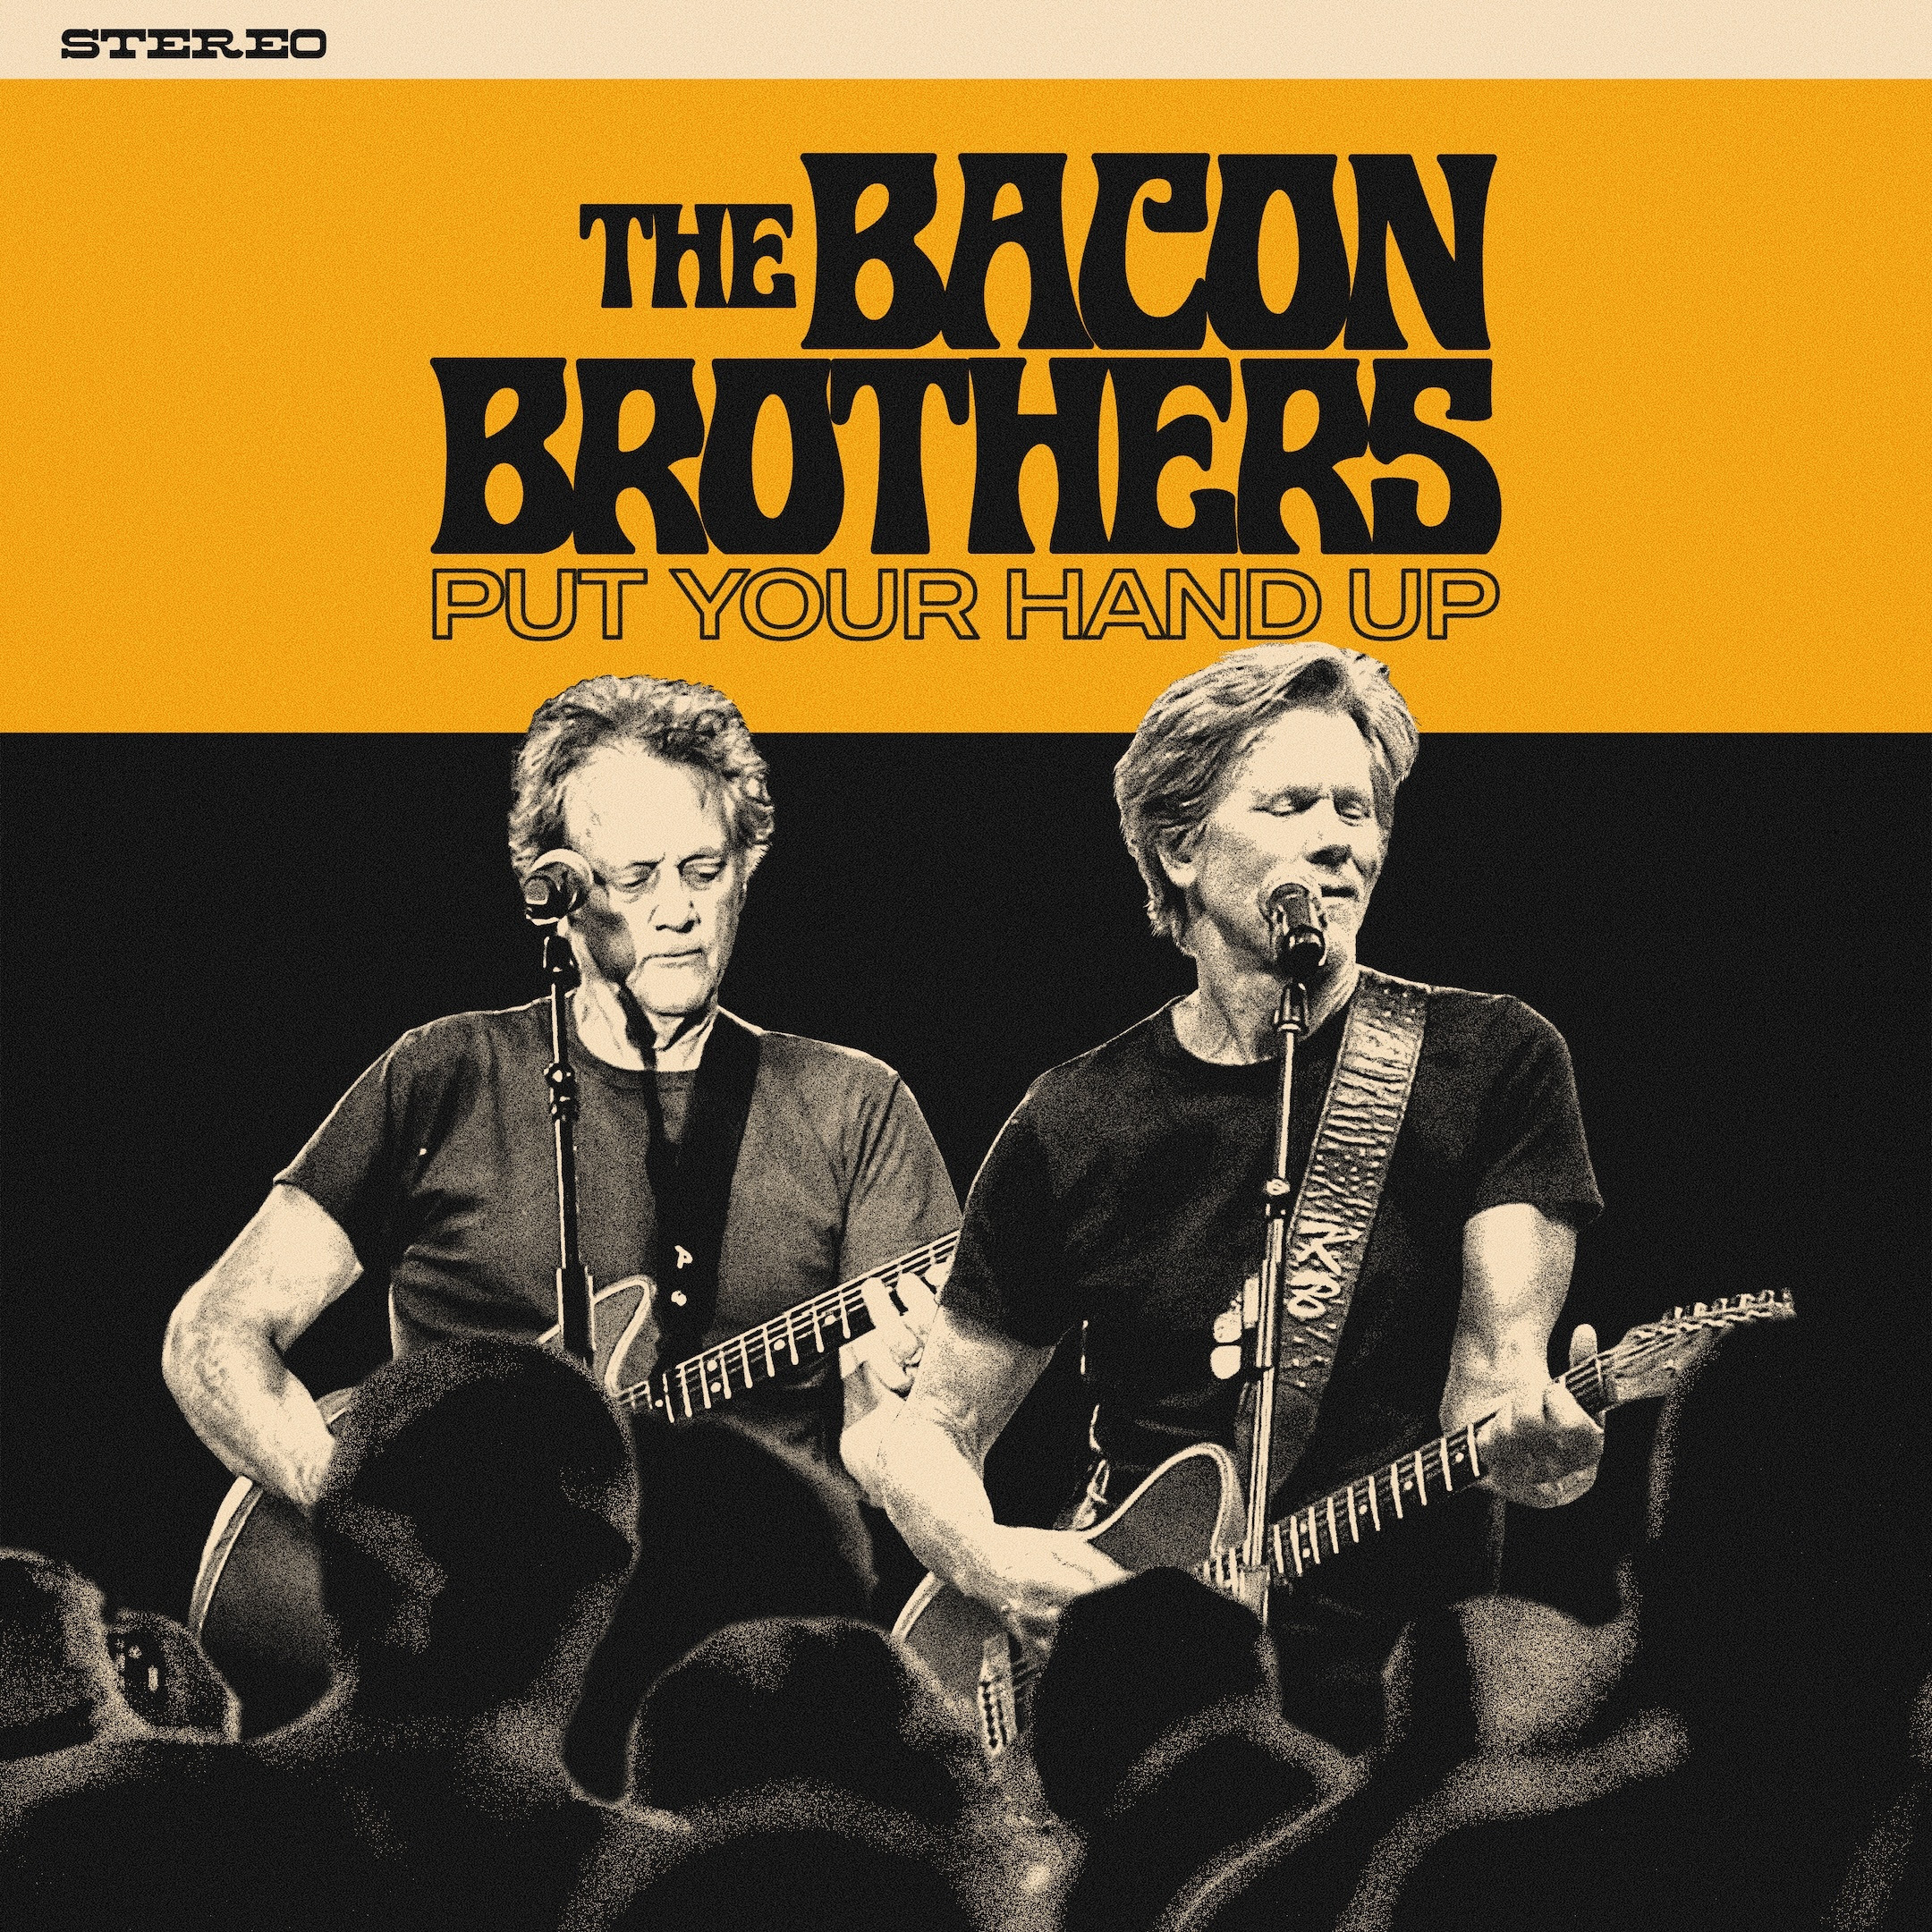 The Bacon Brothers Share New Single 'Put Your Hand Up'